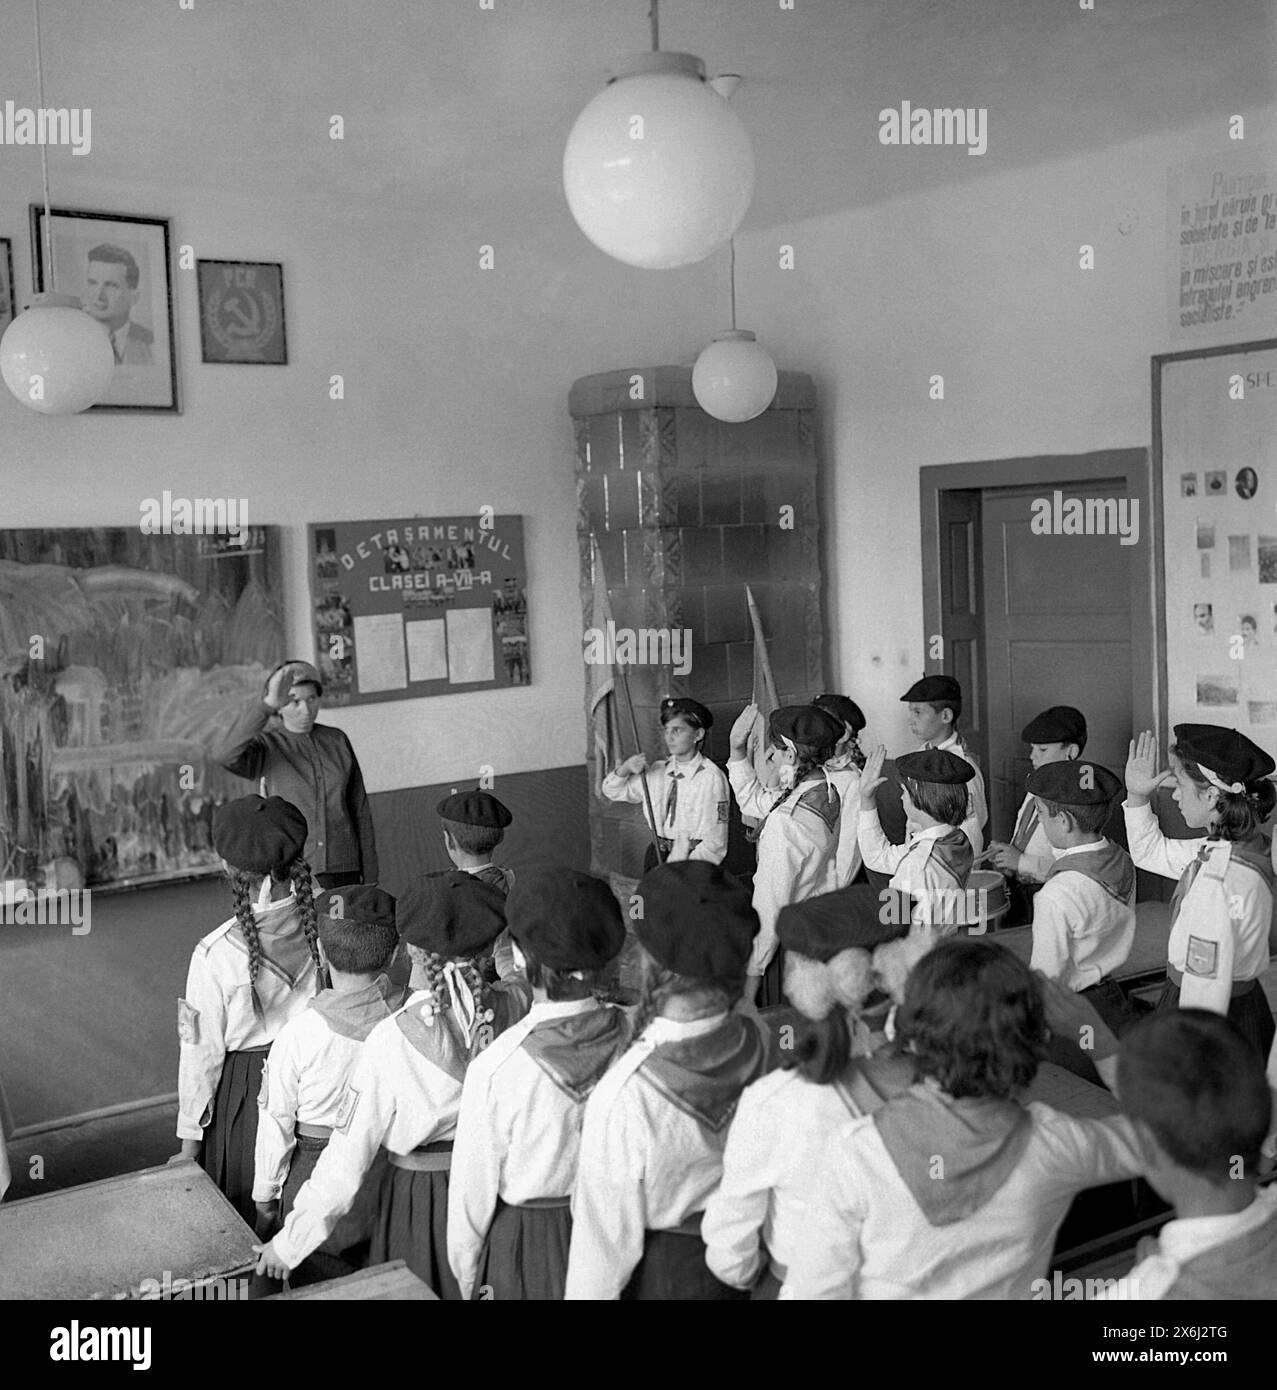 Socialist Republic of Romania in the 1970s. A classroom of 'Pioneers', students in middle school wearing the standardized uniform, performing the militaristic, propagandist ritual, which included the communist flag, the oath, and the salute. The communist symbols (the hammer and sickle) are displayed on the front wall. Stock Photo